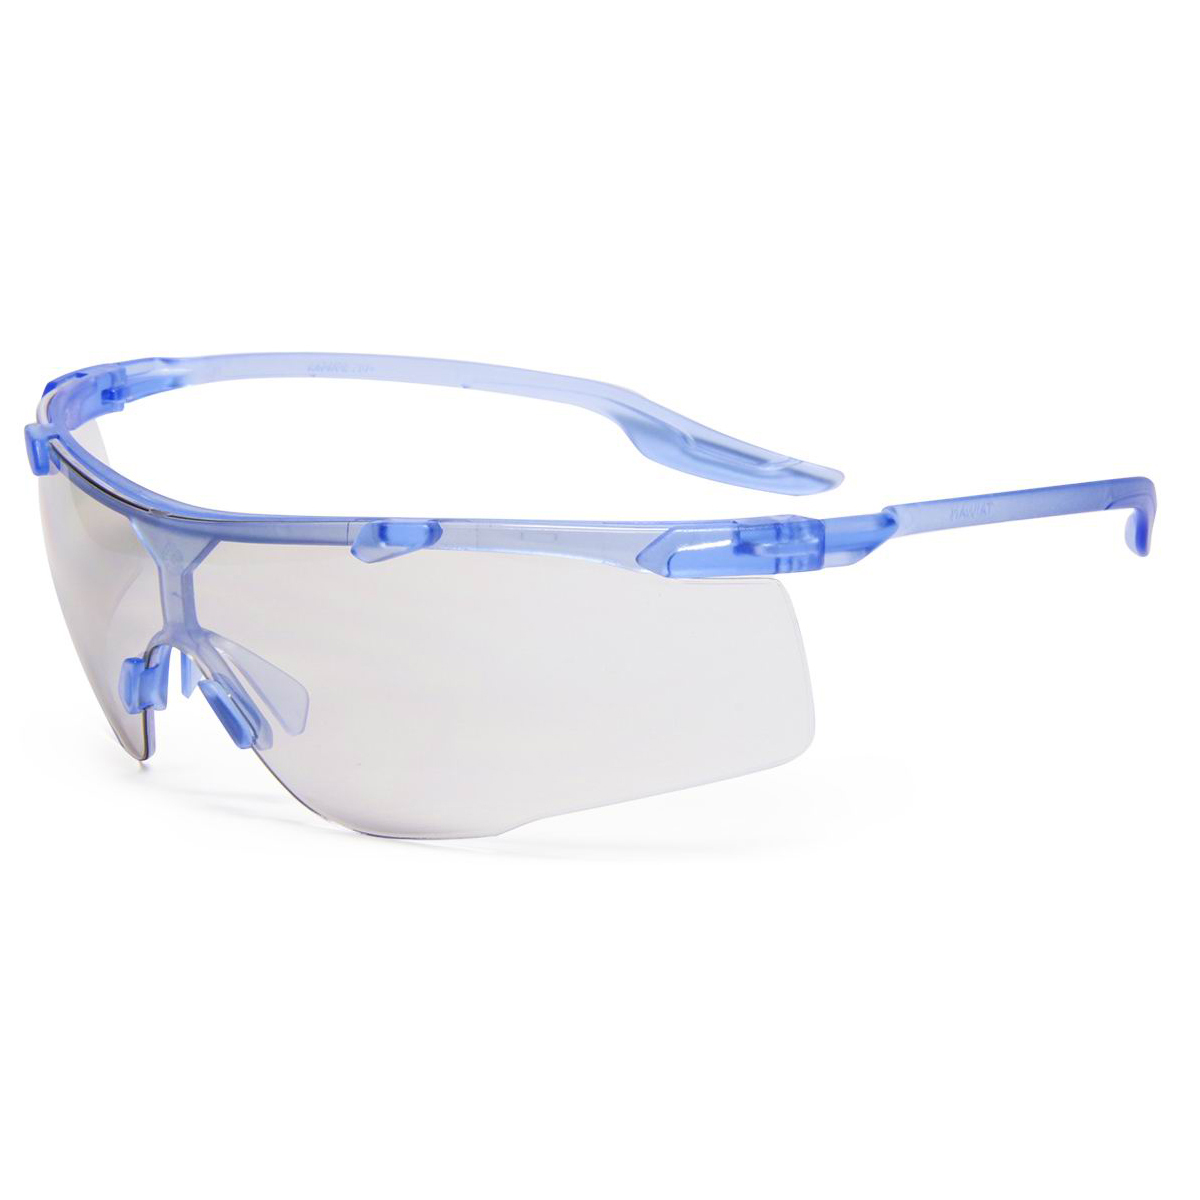 Radnor Saffire Blue Safety Glasses With Gray Polycarbonate Antiscratch Lens Availability